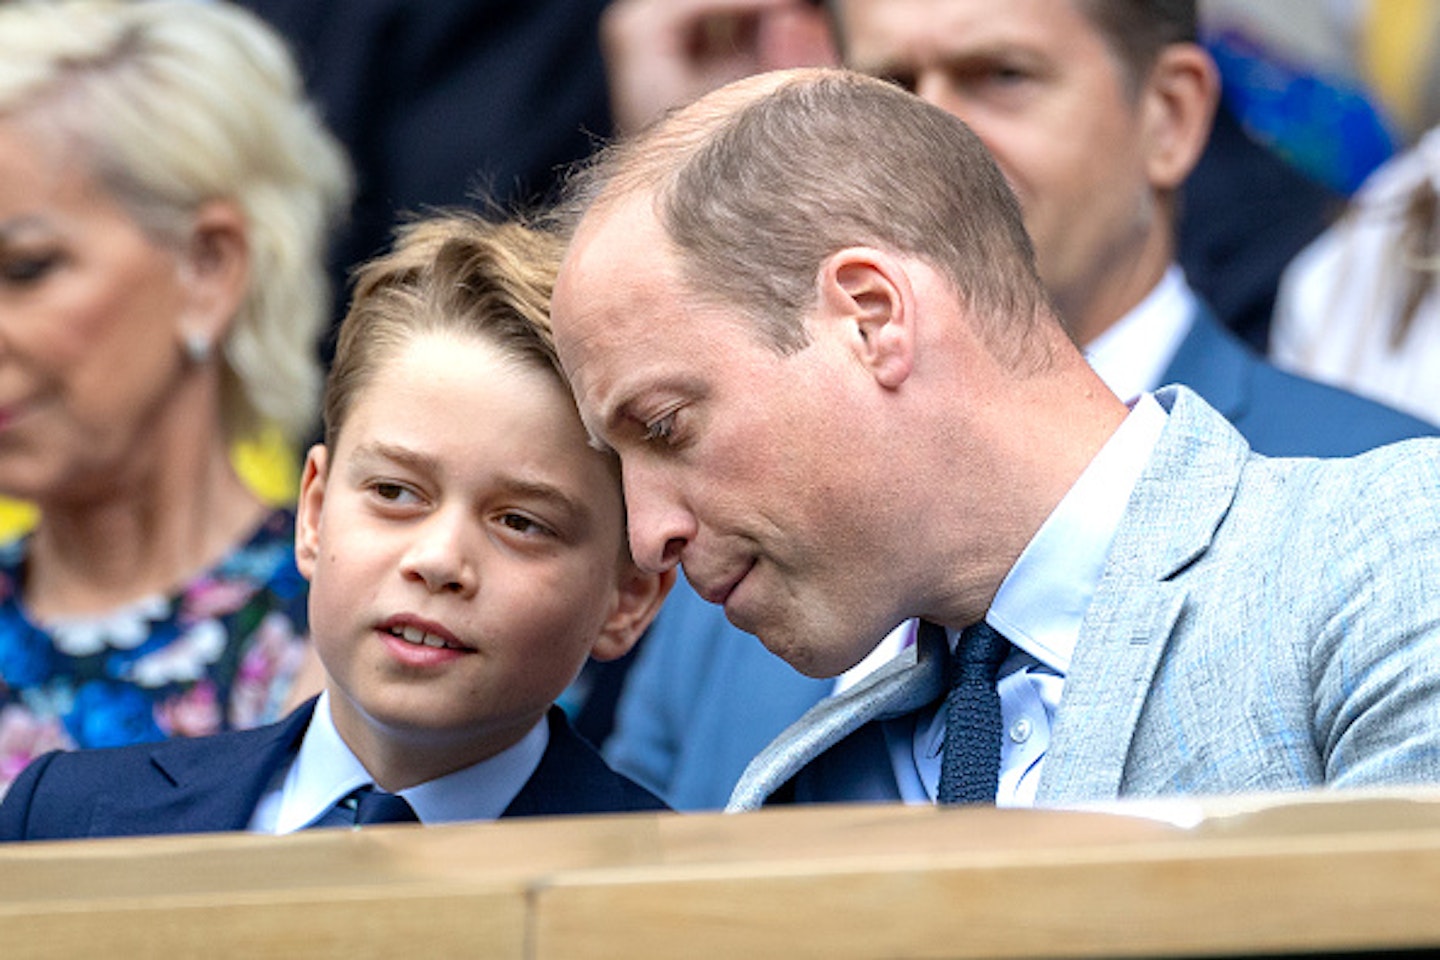 Prince William with his son George